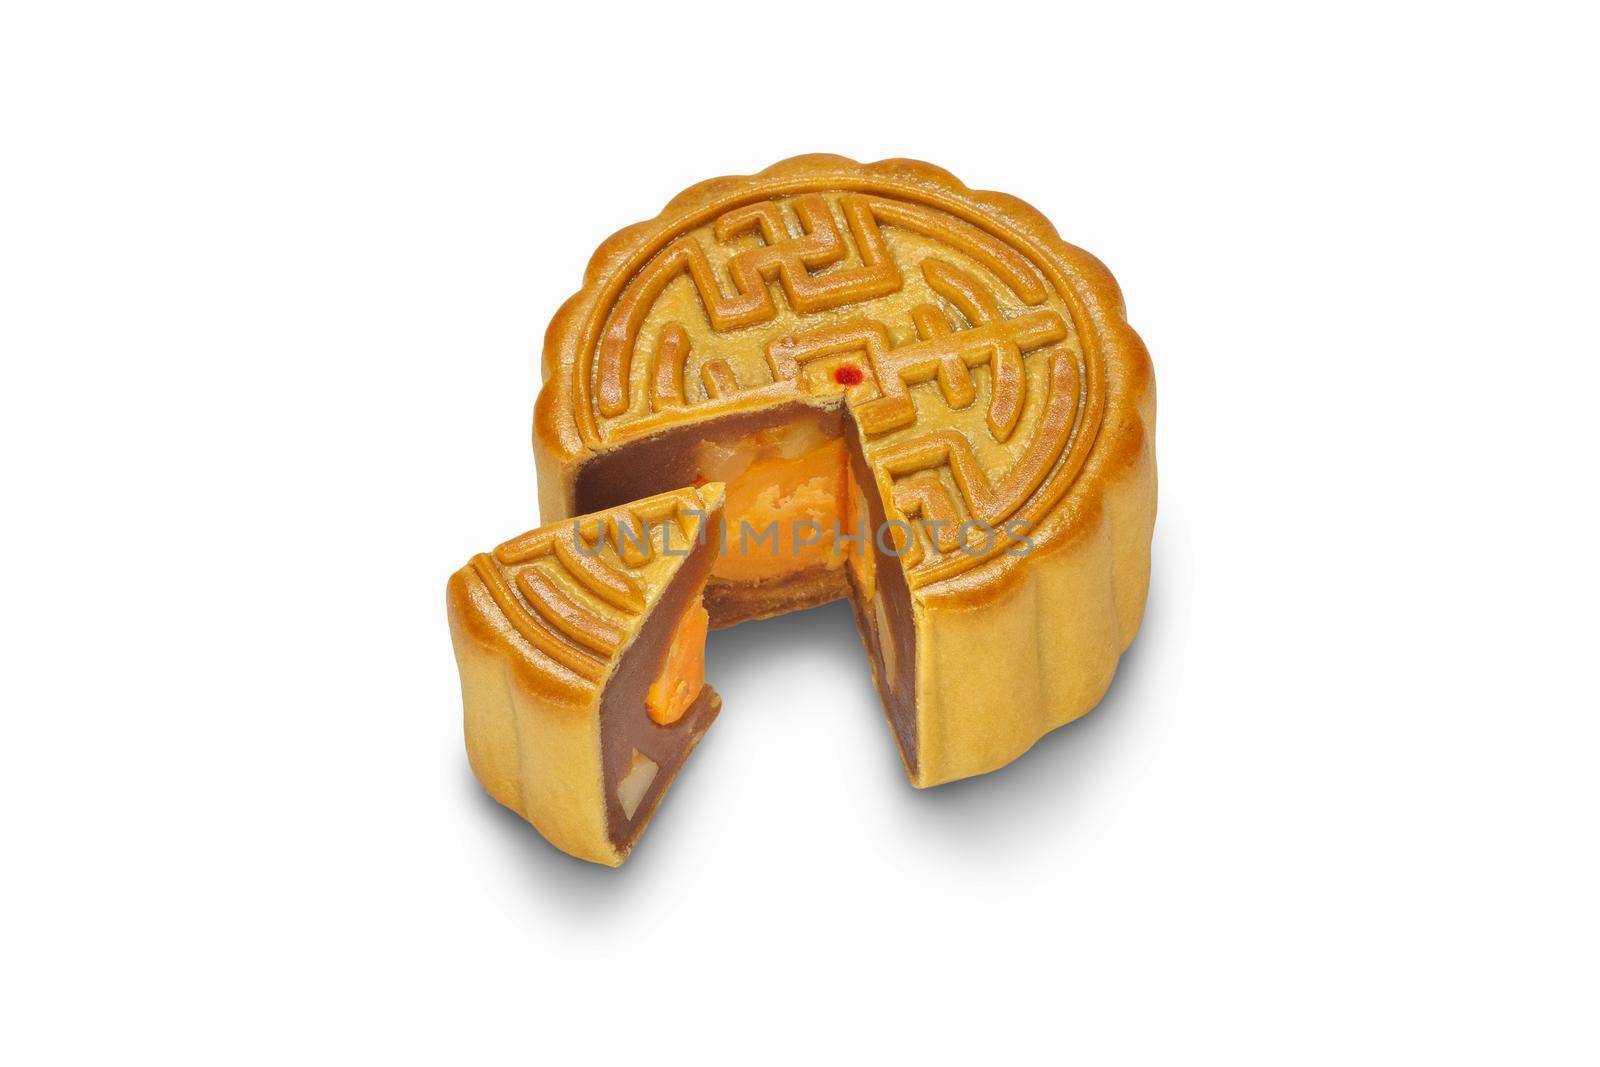 Traditional Mooncake With Durian And Egg Yolk Filling On white background by toa55